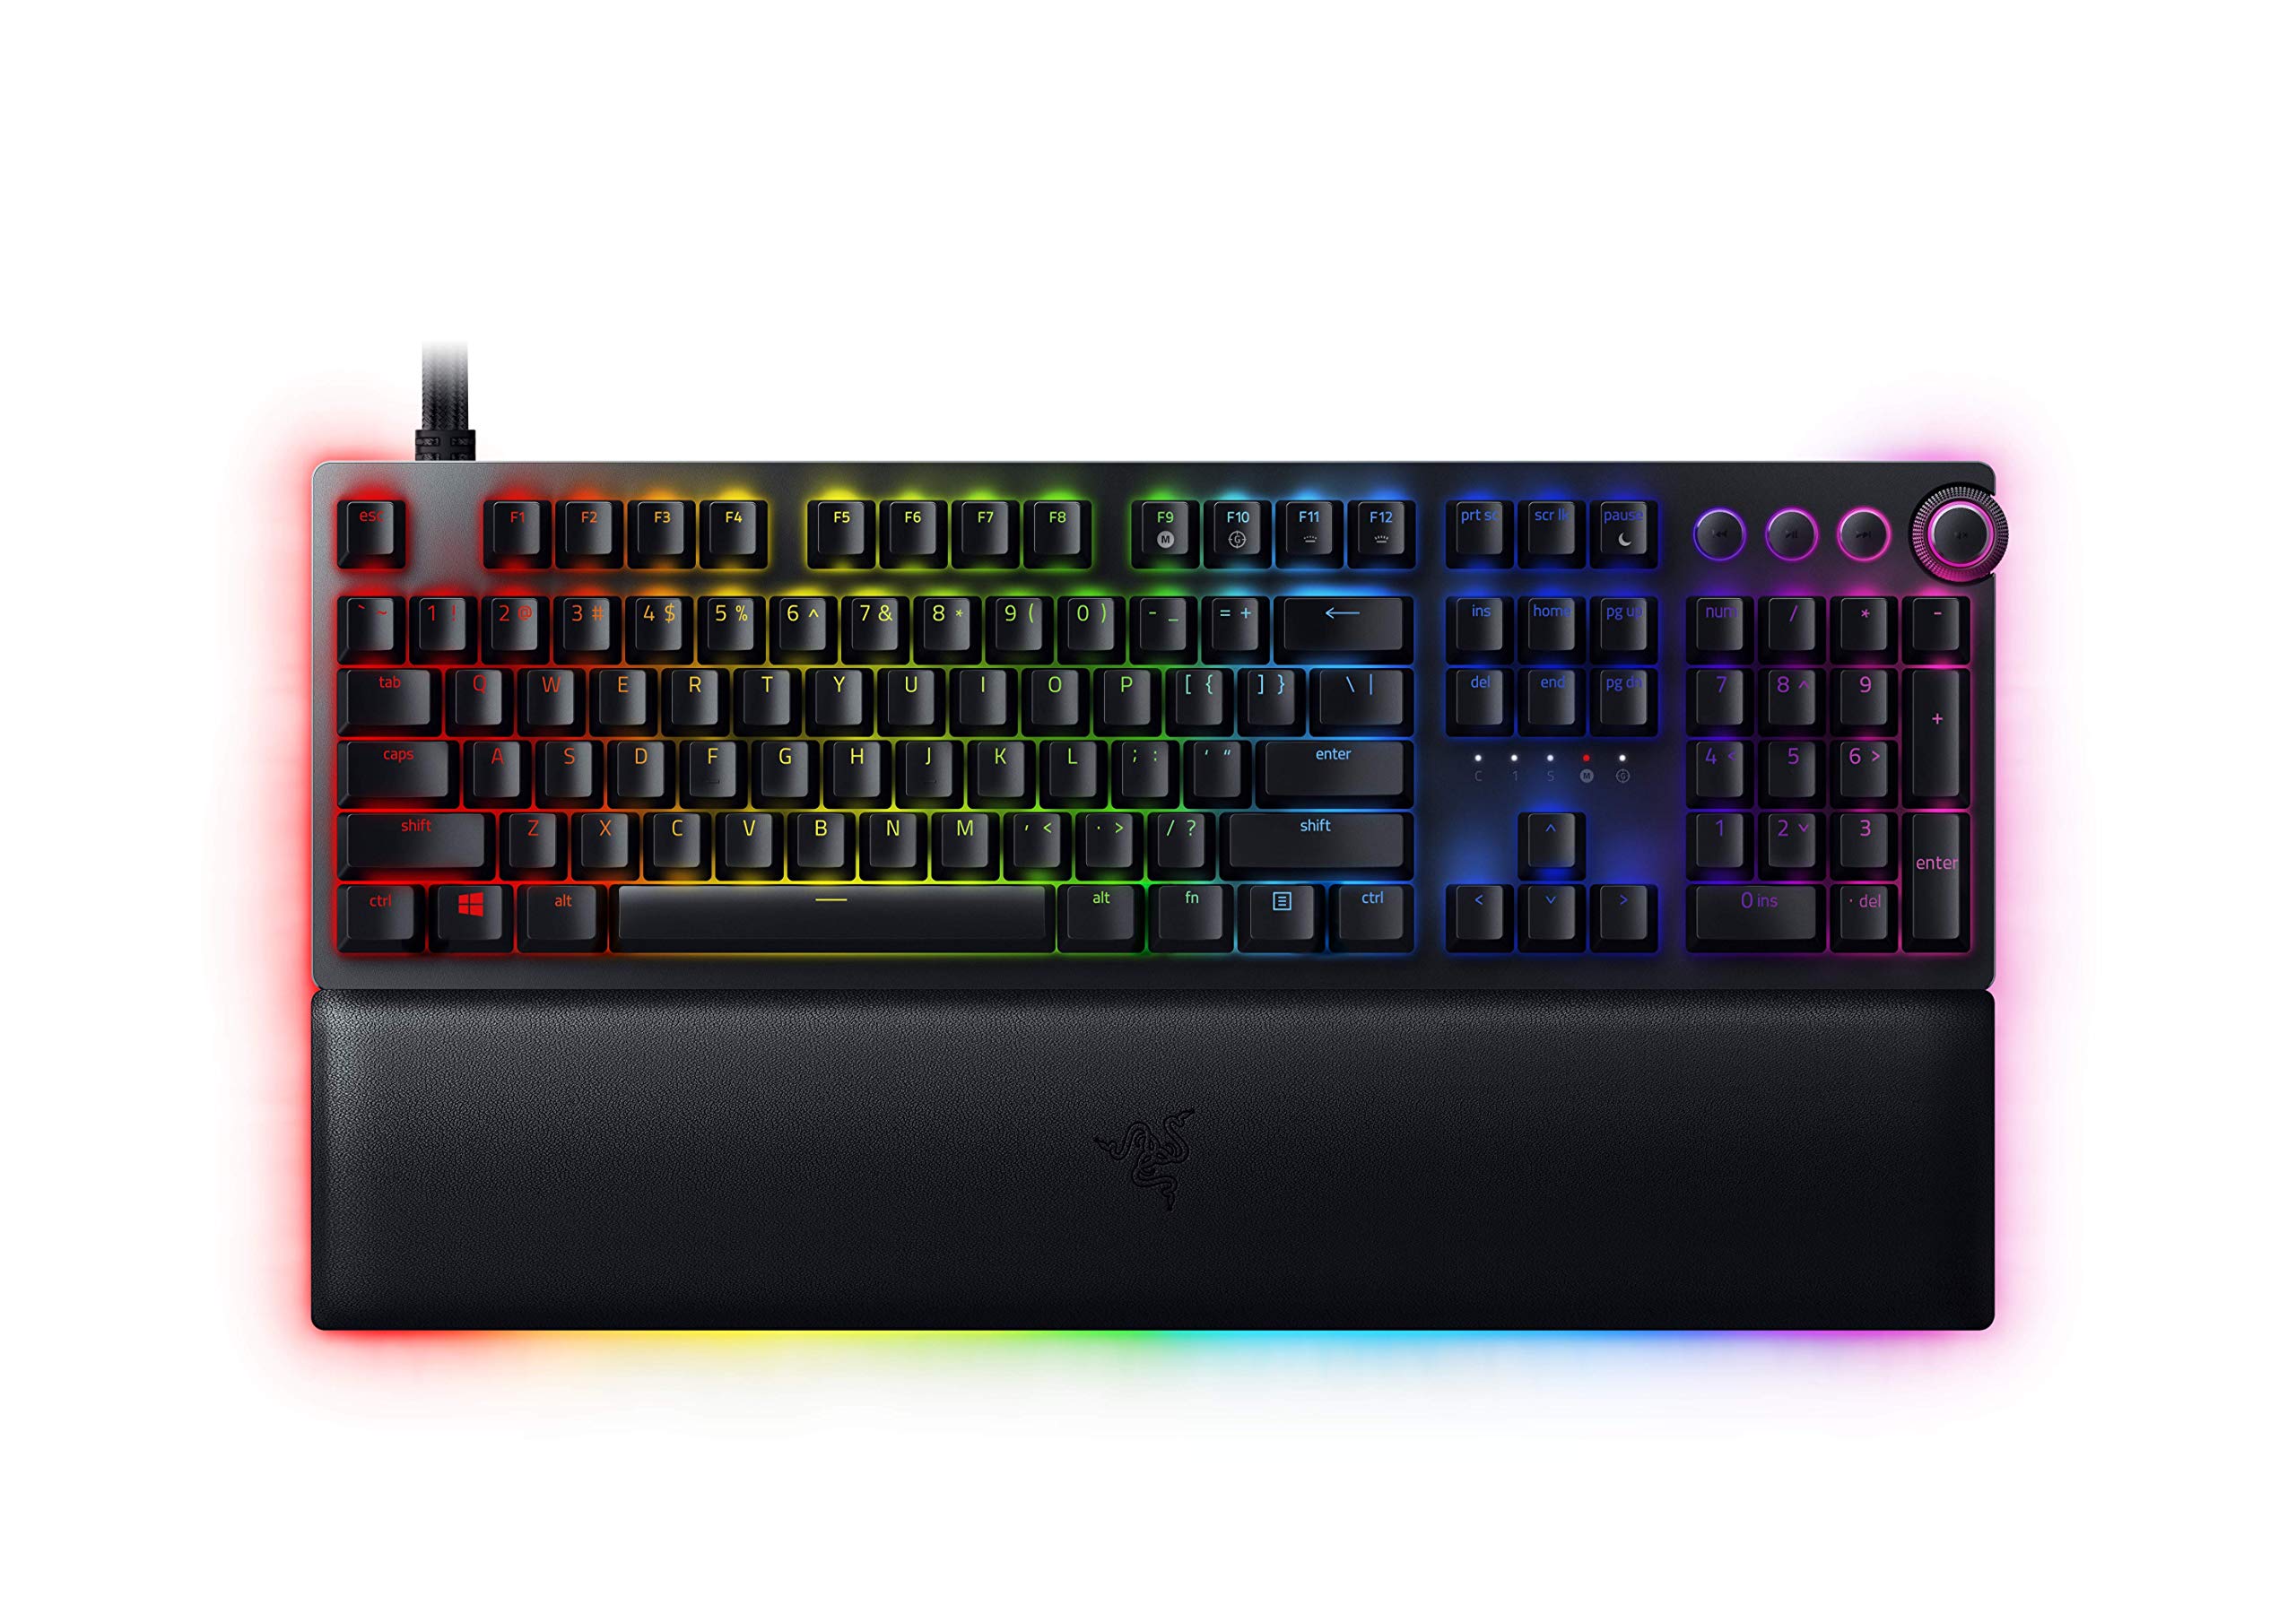 Image for Save 60 per cent on Razer's Huntsman Elite gaming keyboard, now just £79.99 at Amazon